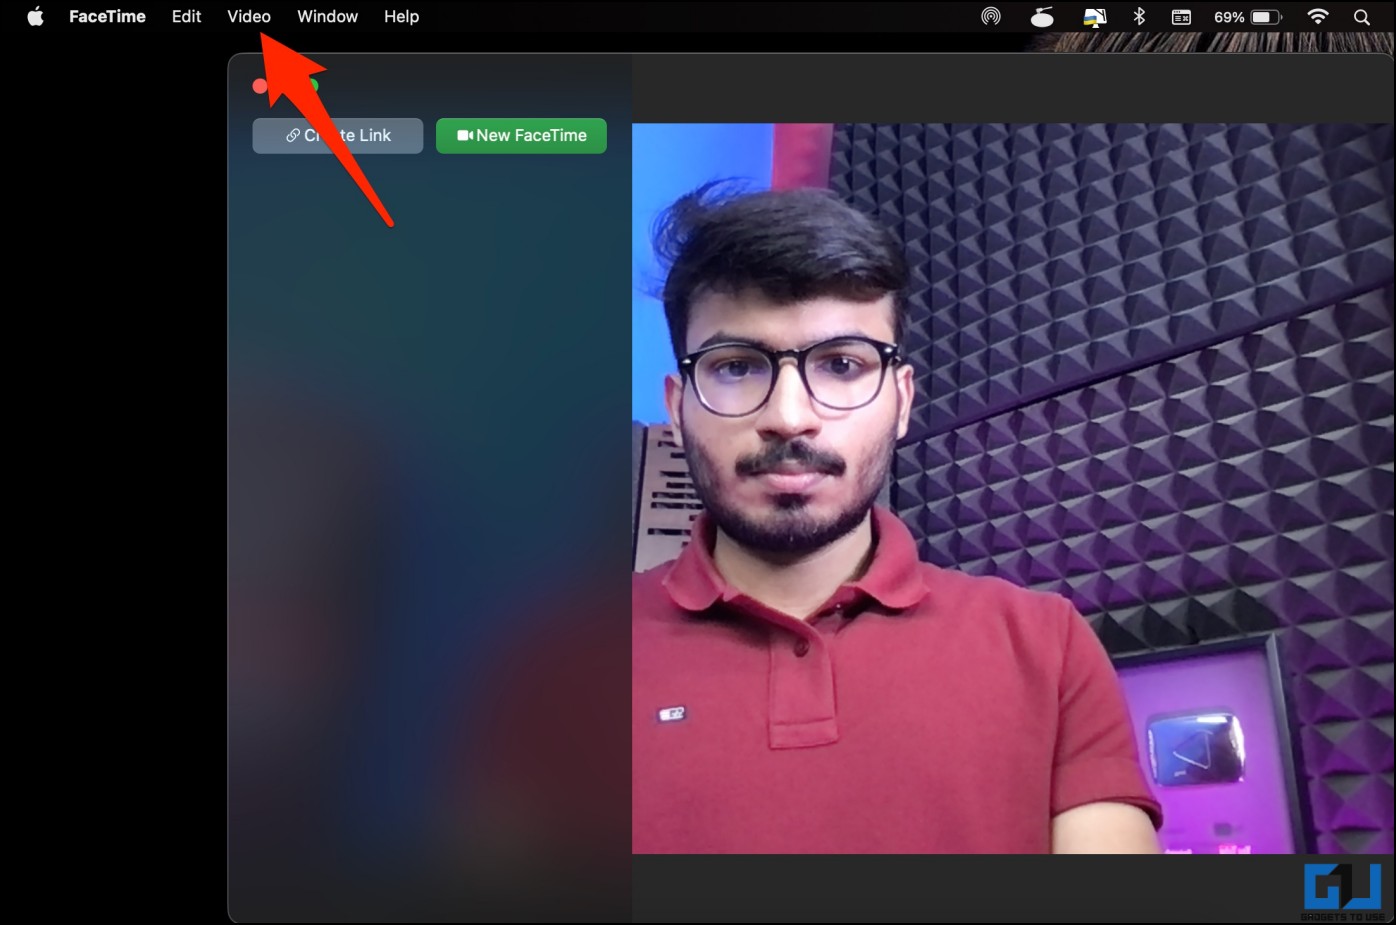 Use camera continuity in Facetime video calls